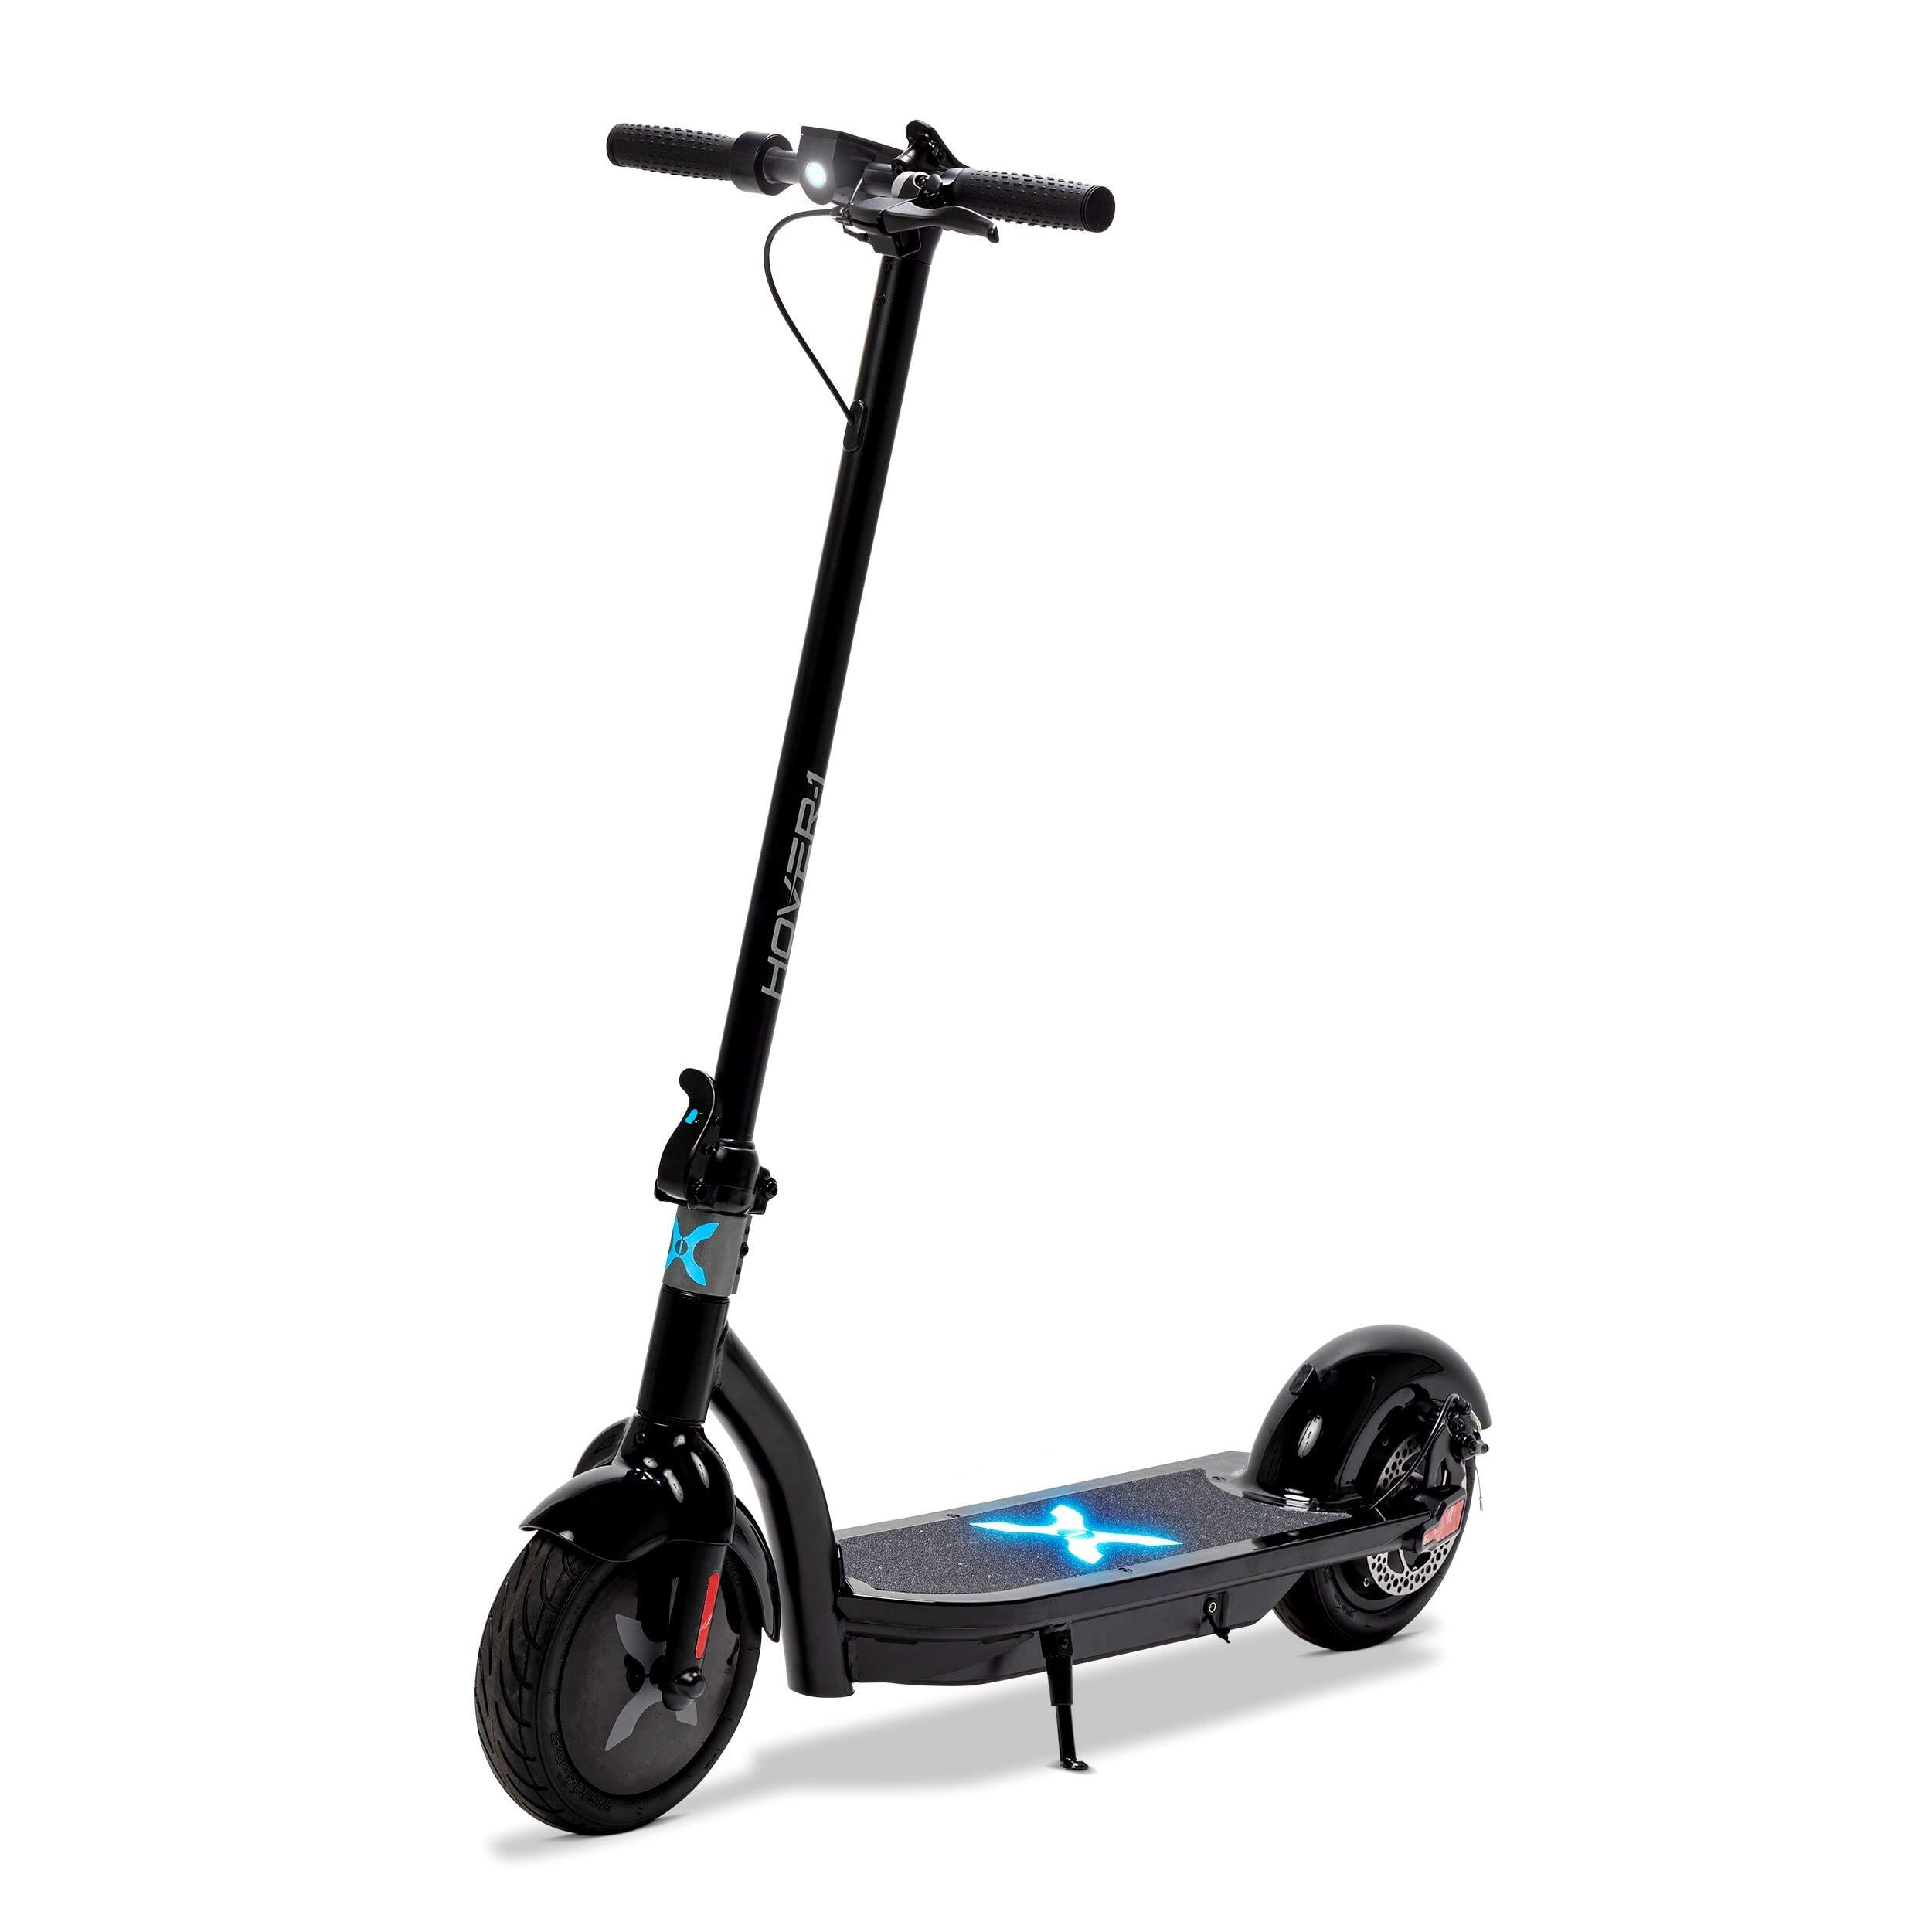 Alpha Electric Scooter | 18MPH, 12M Range, 5HR Charge, LCD Display, 10 Inch High-Grip Tires, 264LB Max Weight, Cert. & Tested - Safe for Kids, Teens & Adults